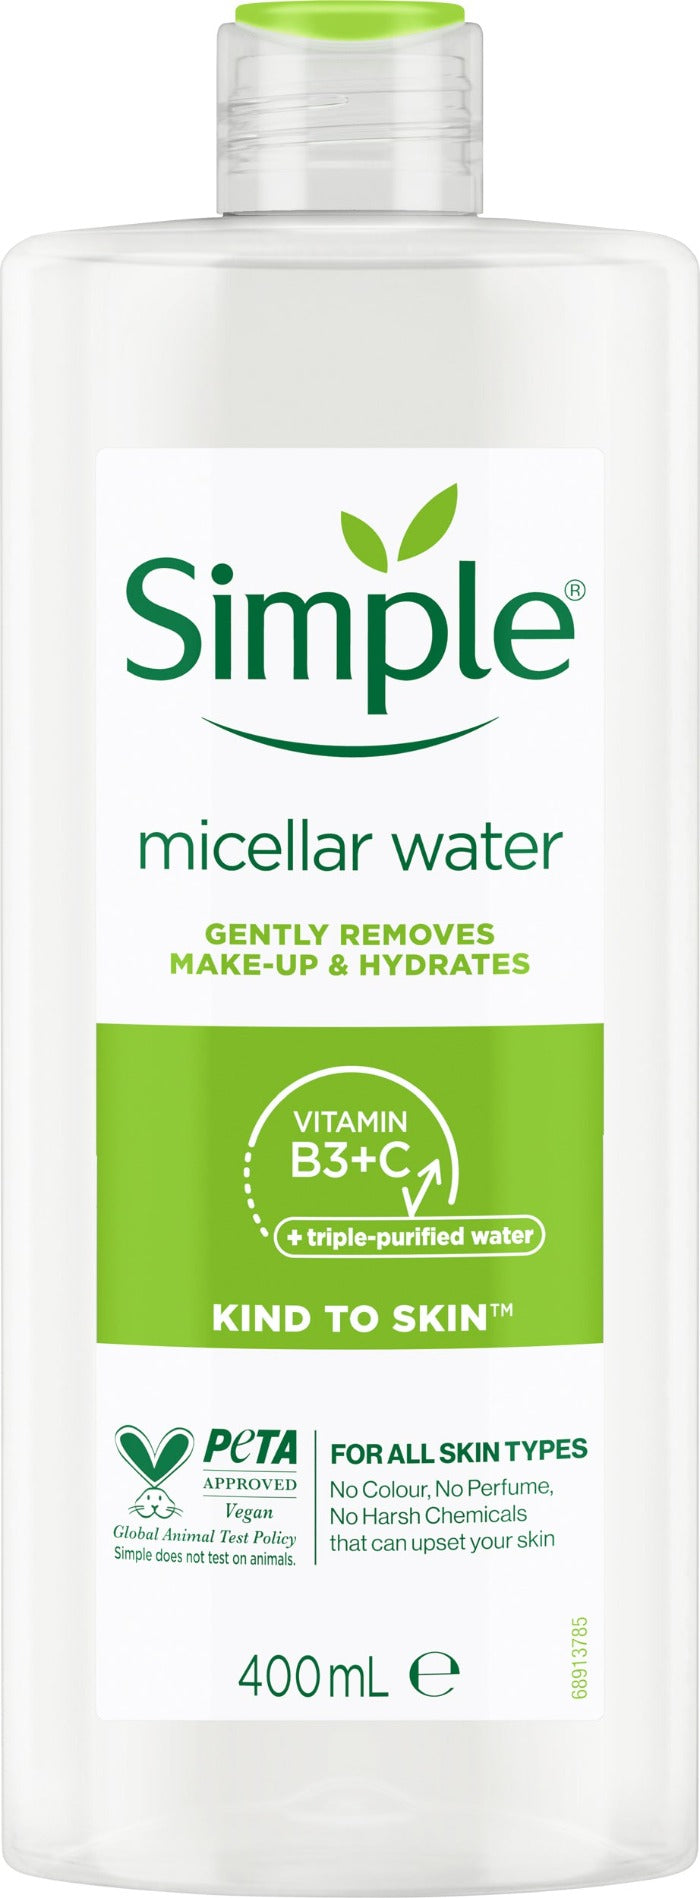 Simple Micellar Cleansing Water Kind To Skin - 400ml | سمبل منظف ماء ميسلير - 400 مل